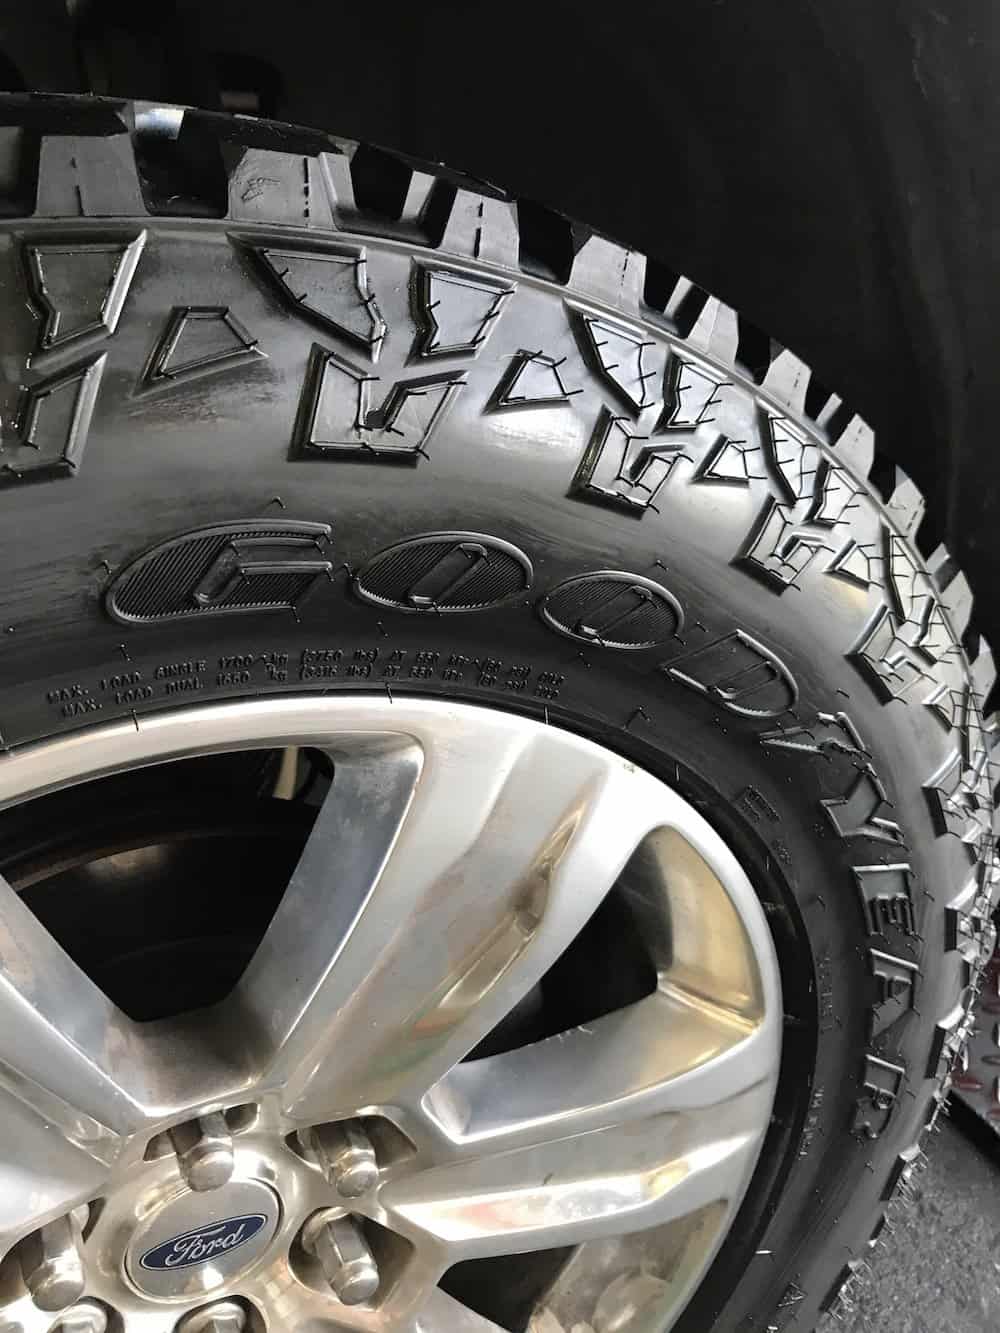 Goodyear Wrangler UltraTerrain AT Thrives on the Street or in the Dirt